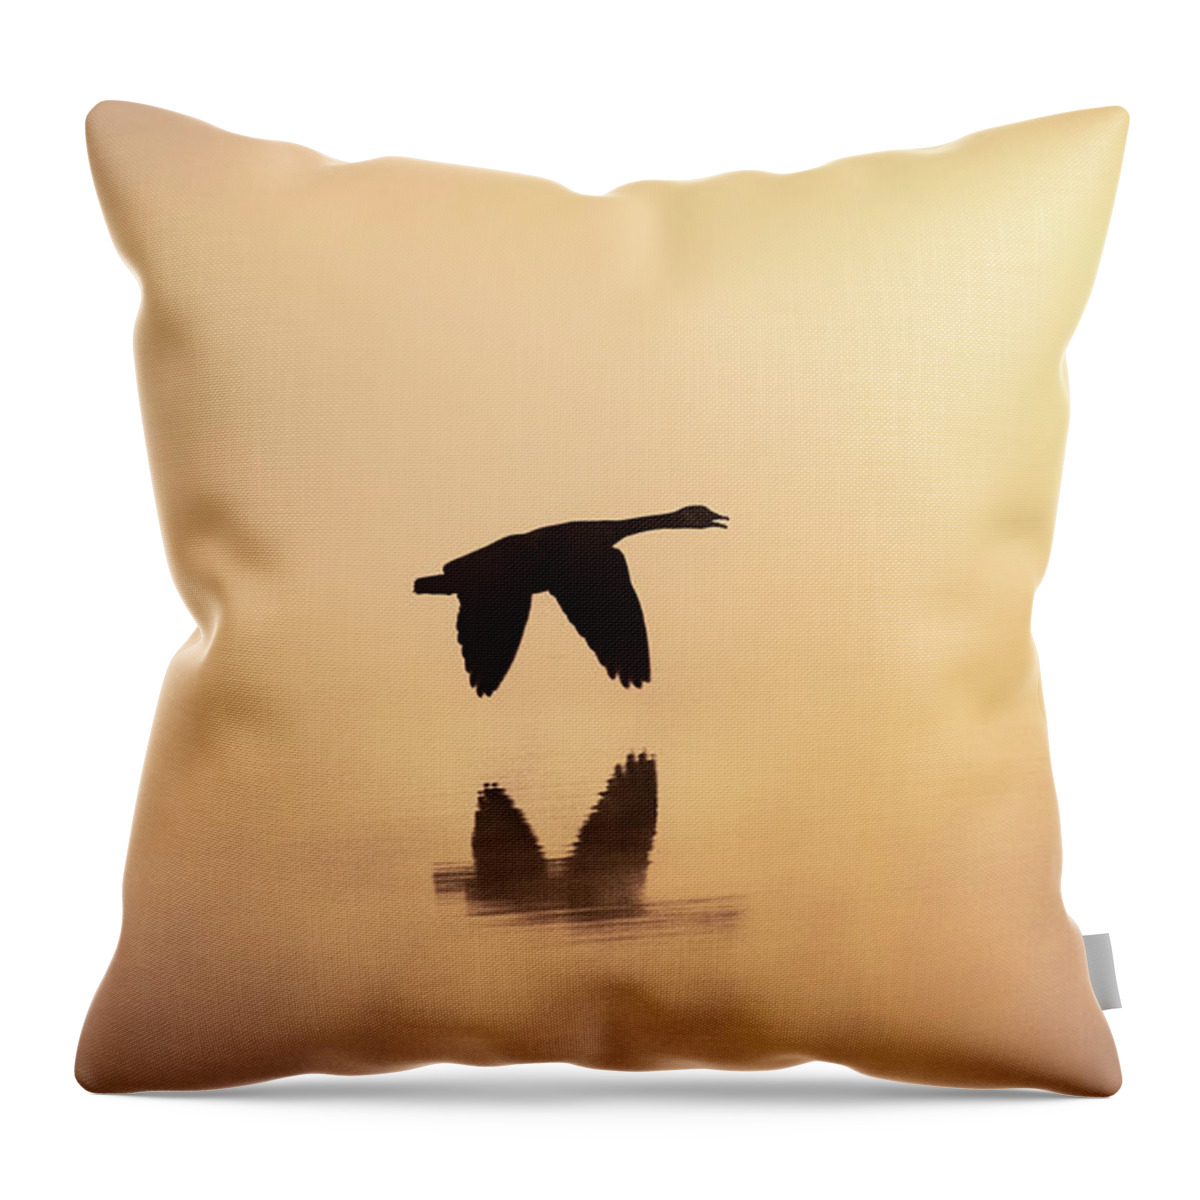 Canadian Goose Throw Pillow featuring the photograph Goose In Flight Among The Mist by Jordan Hill